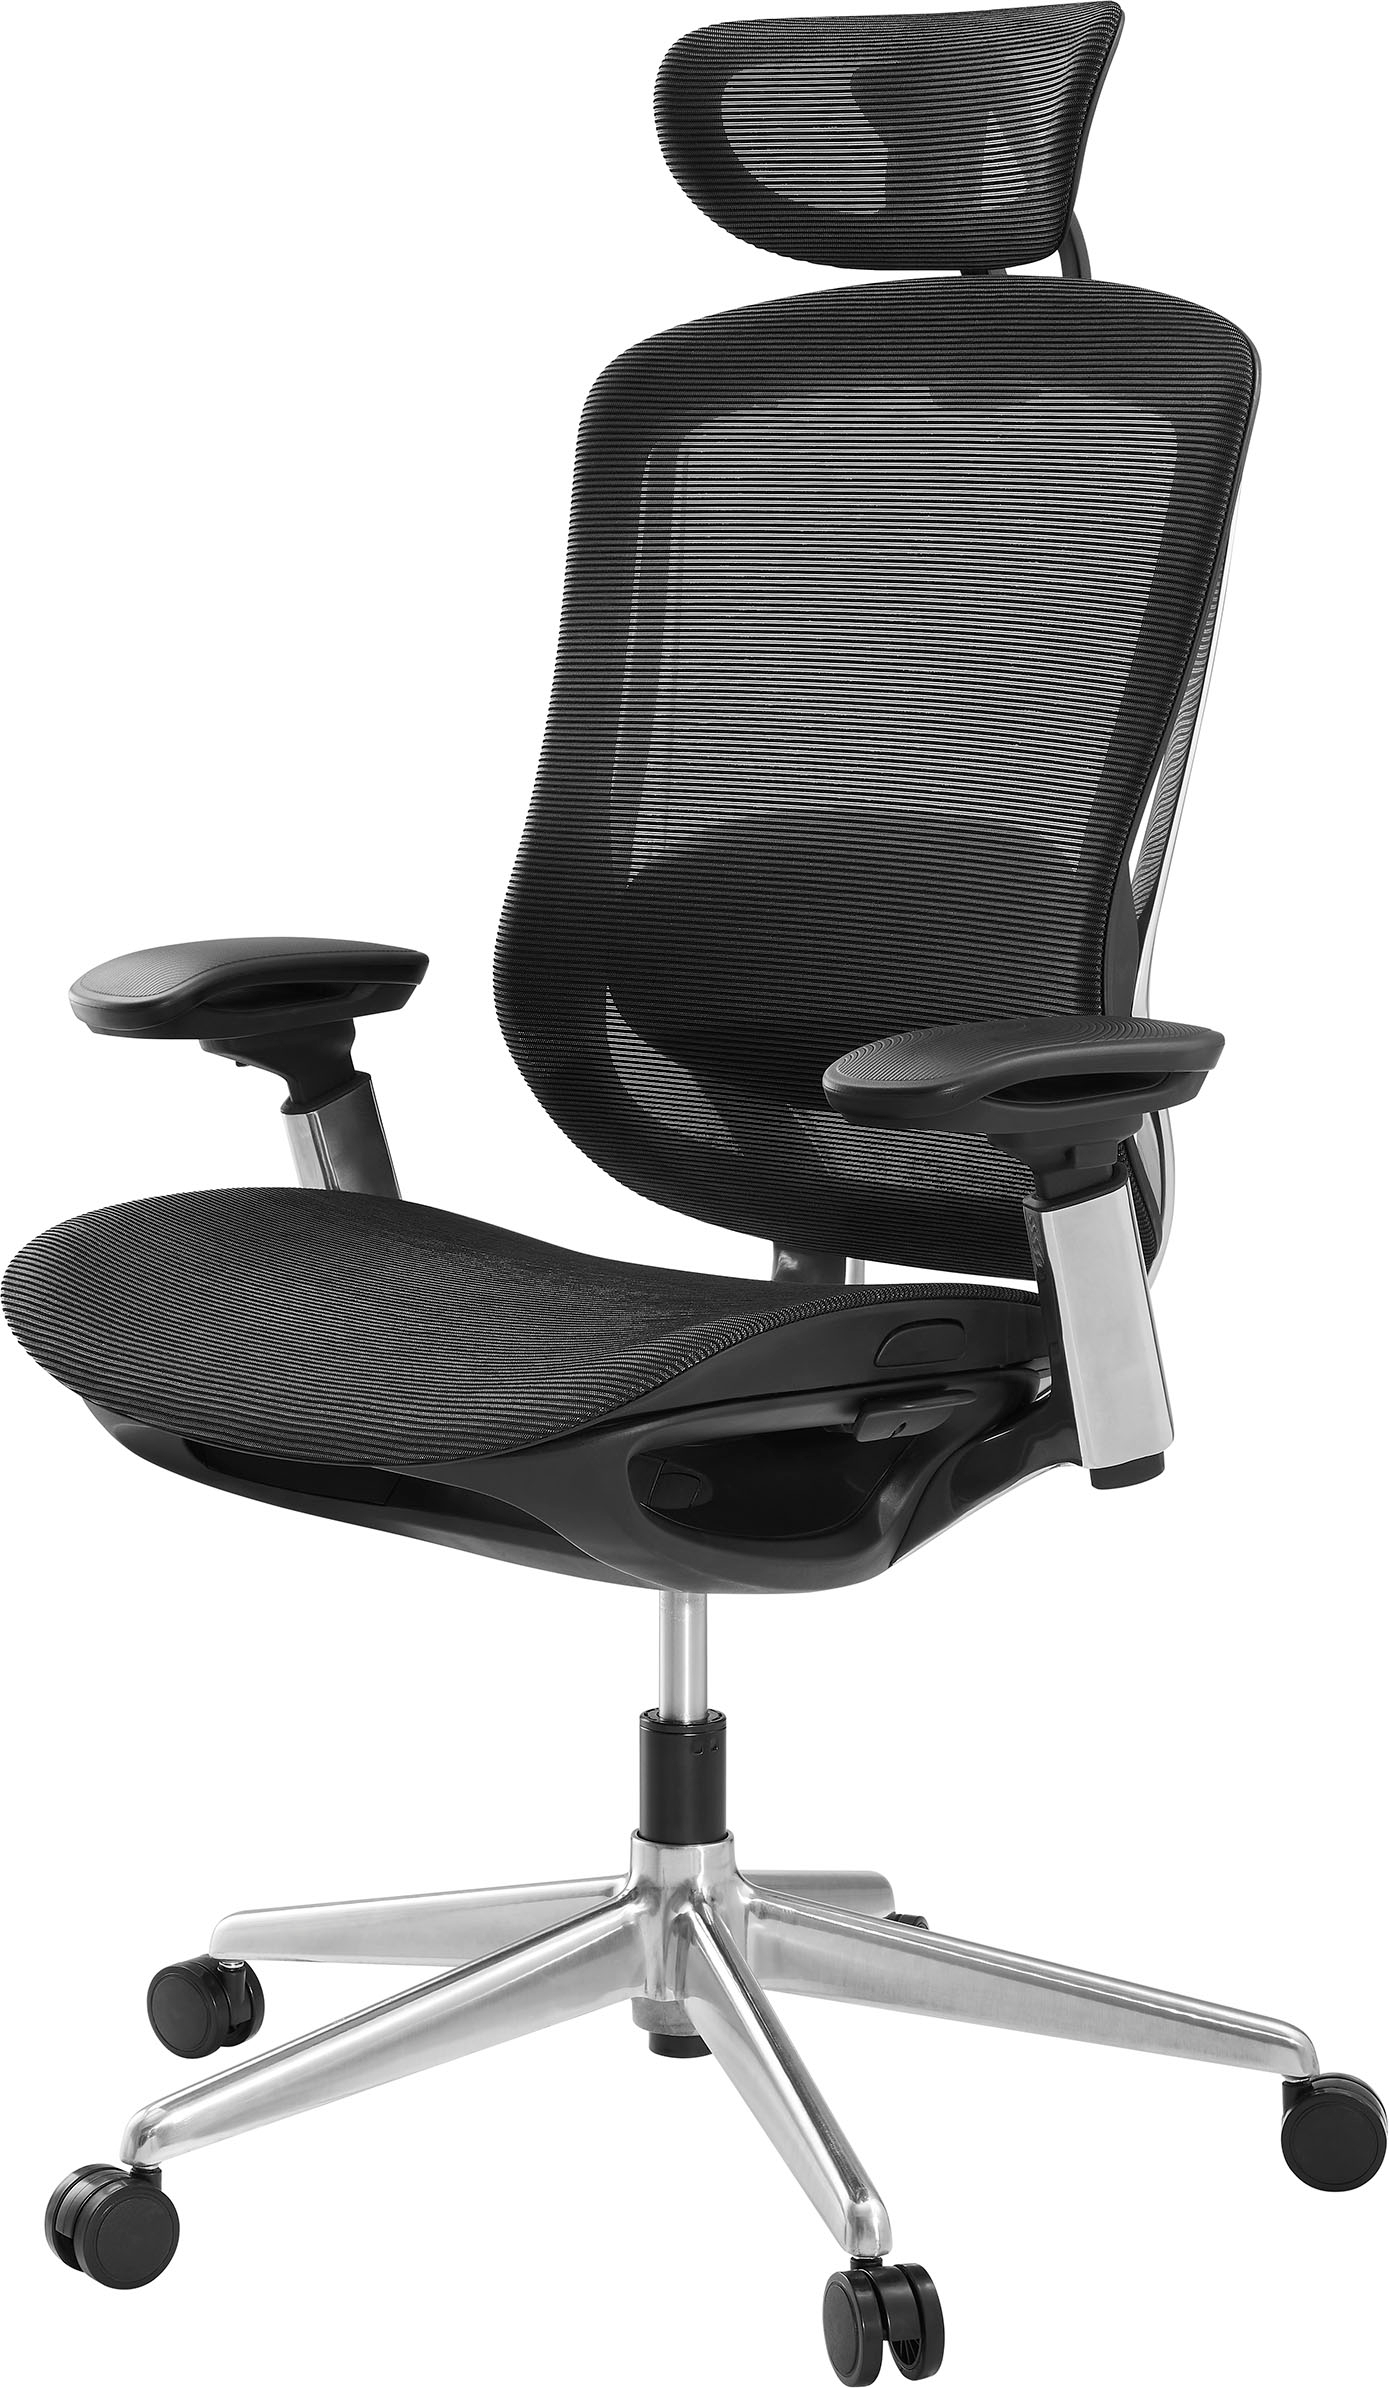 Neck Pain Office Chair - Best Buy